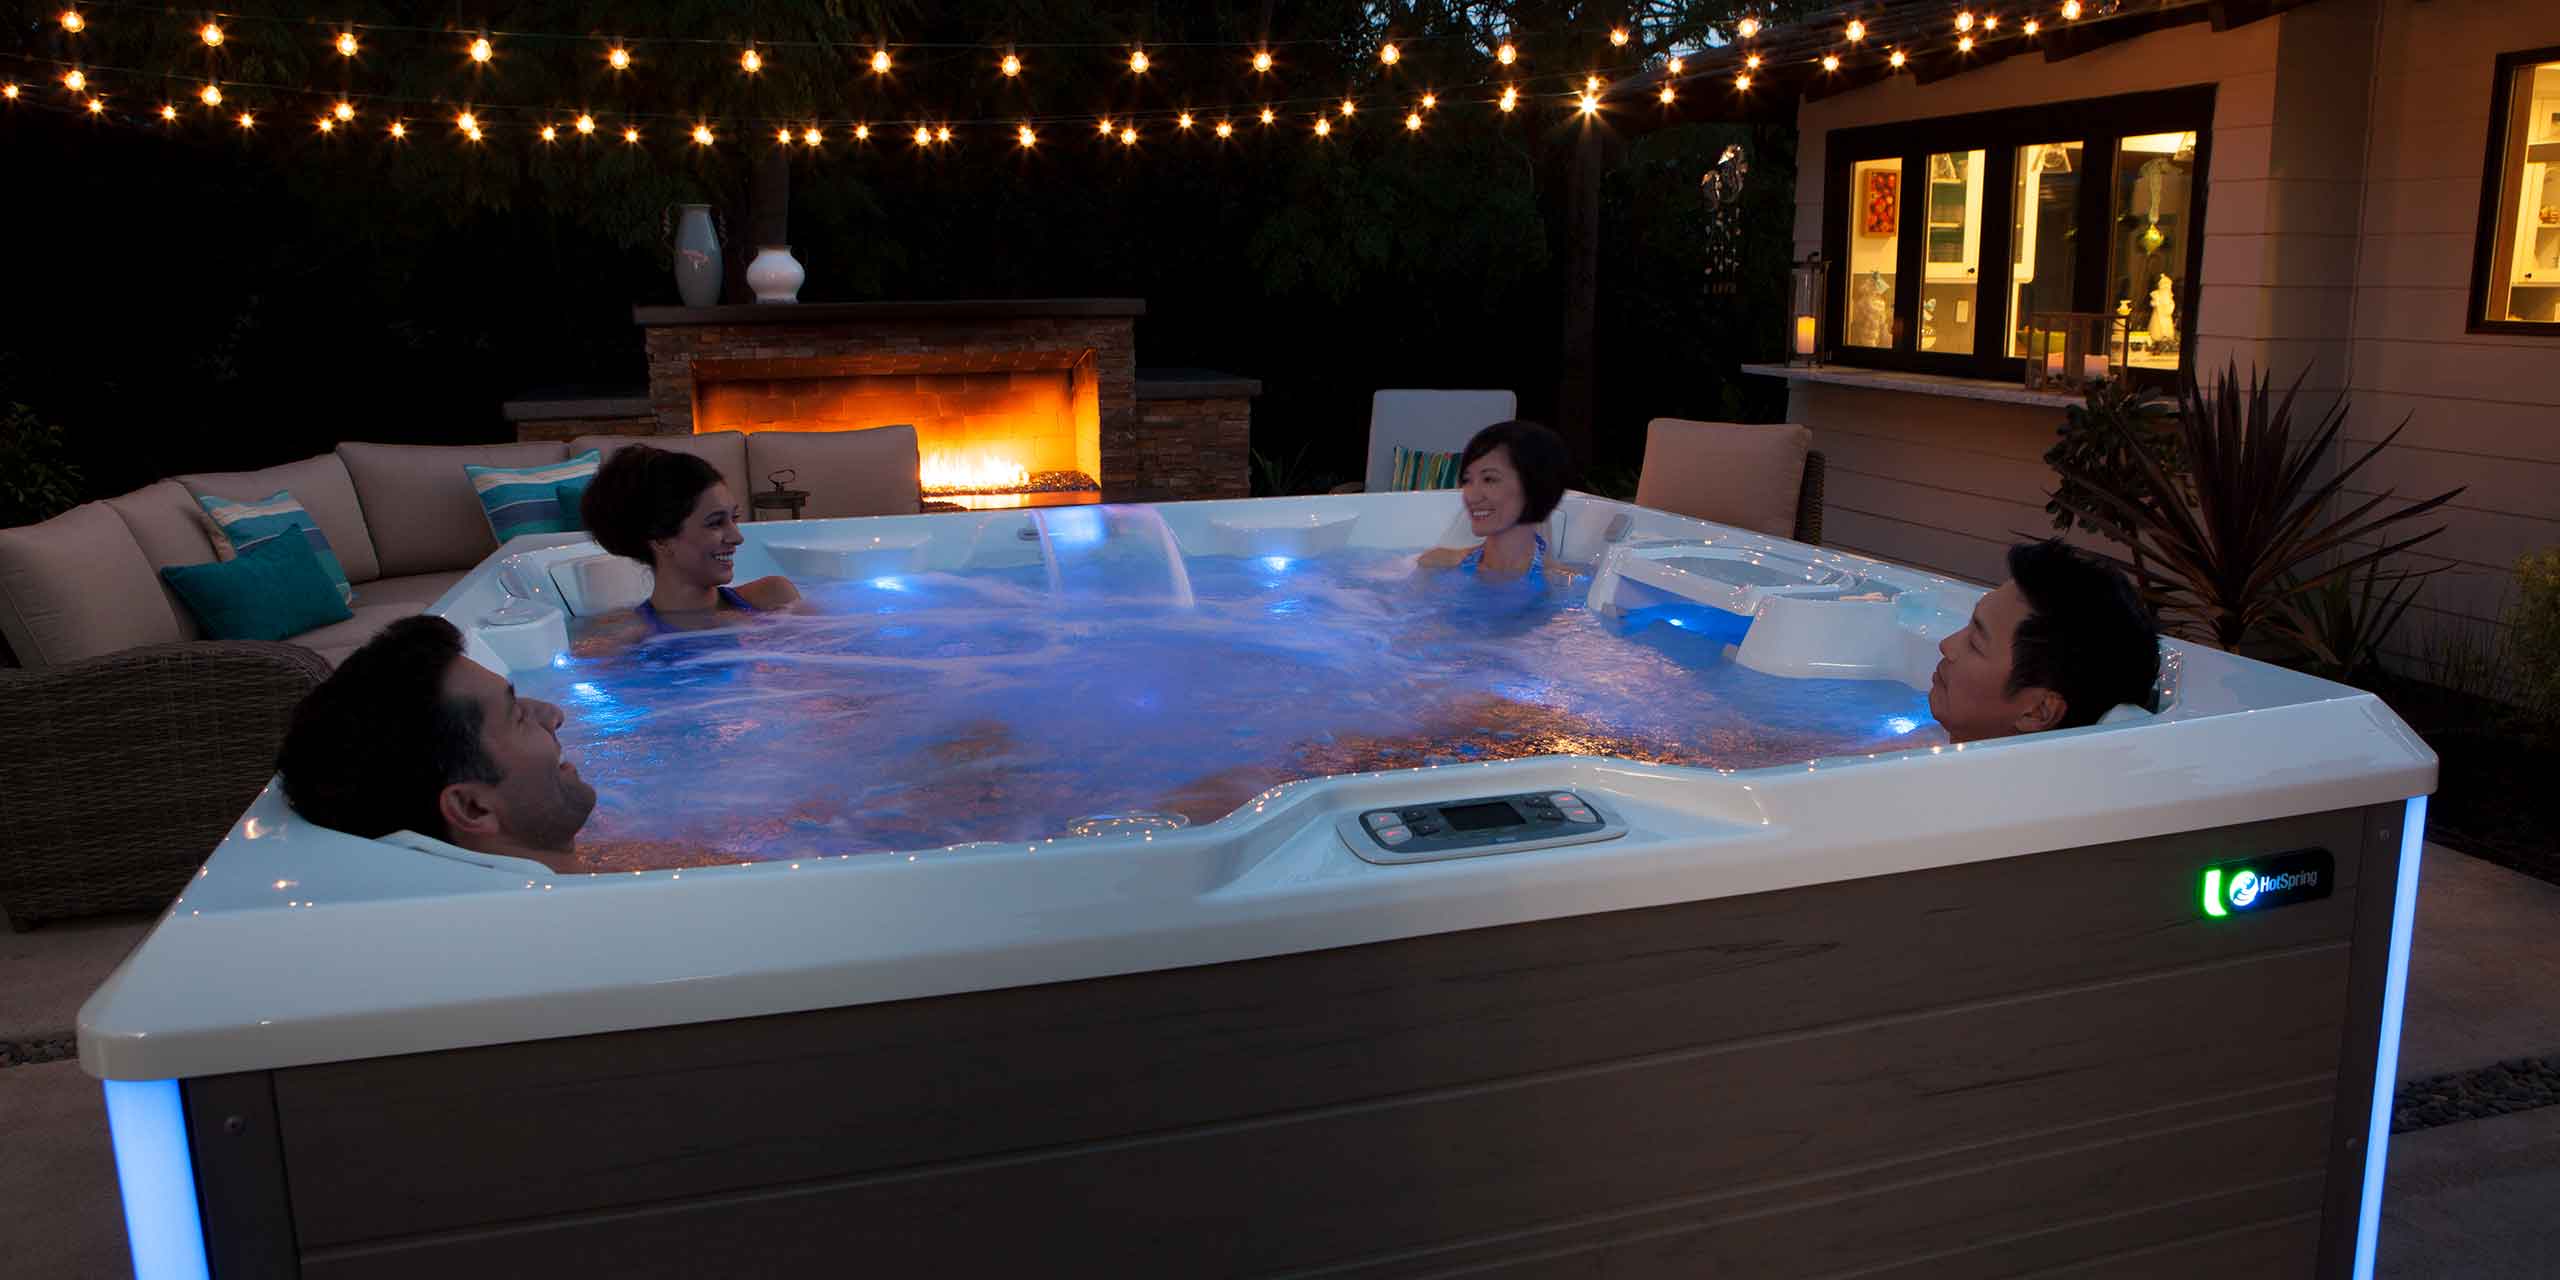 What Are the Benefits of Salt Water Hot Tubs? | Mainely Tubs 2022